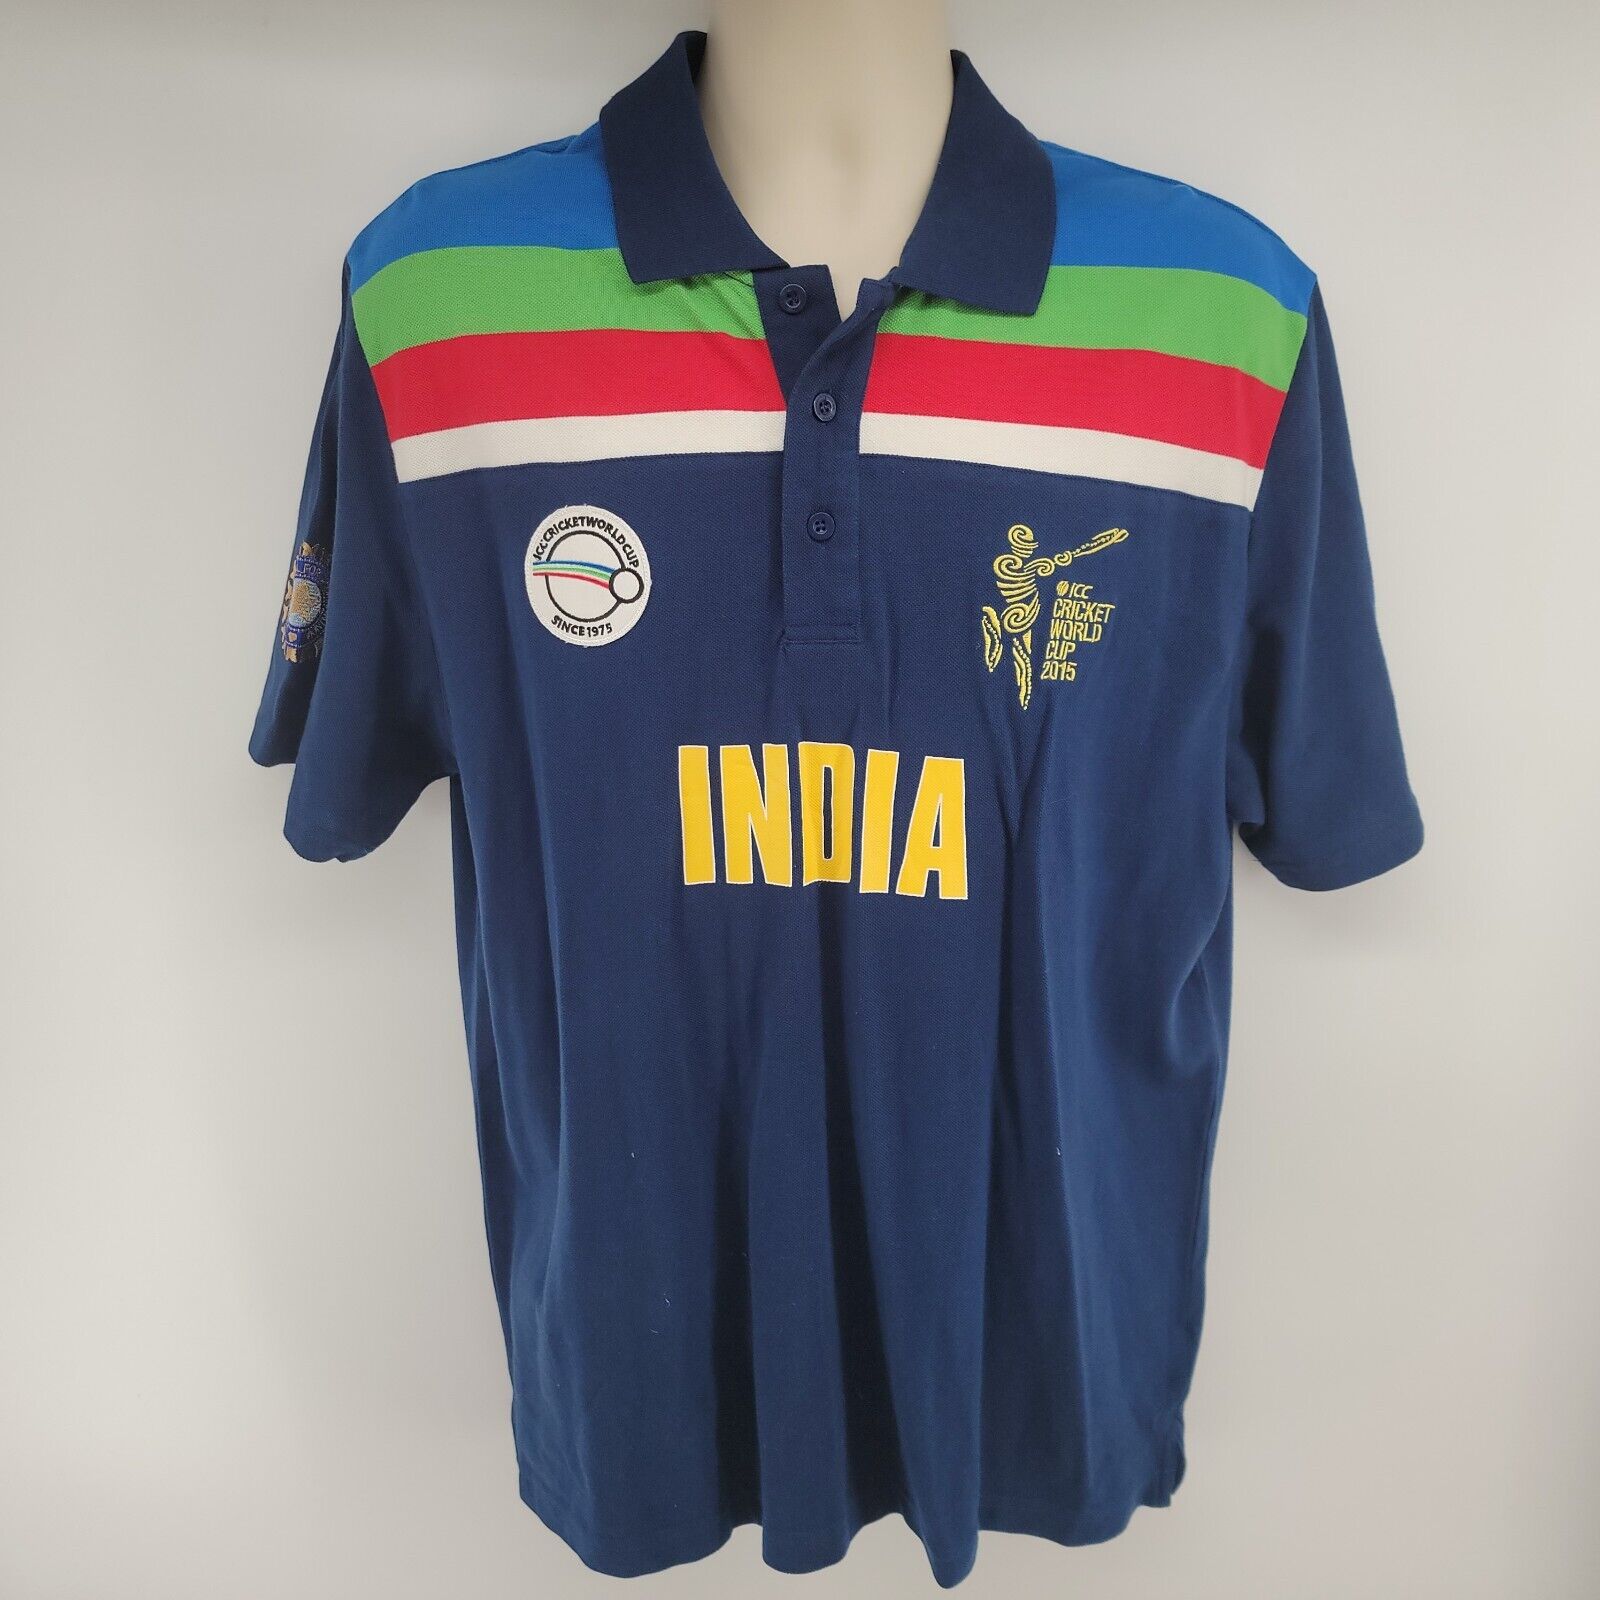 ICC Cricket World Cup 2015 India Jersey Polo Shirt Mens 2XL ICC Cricket World Cup CWC12398 - фотография #2